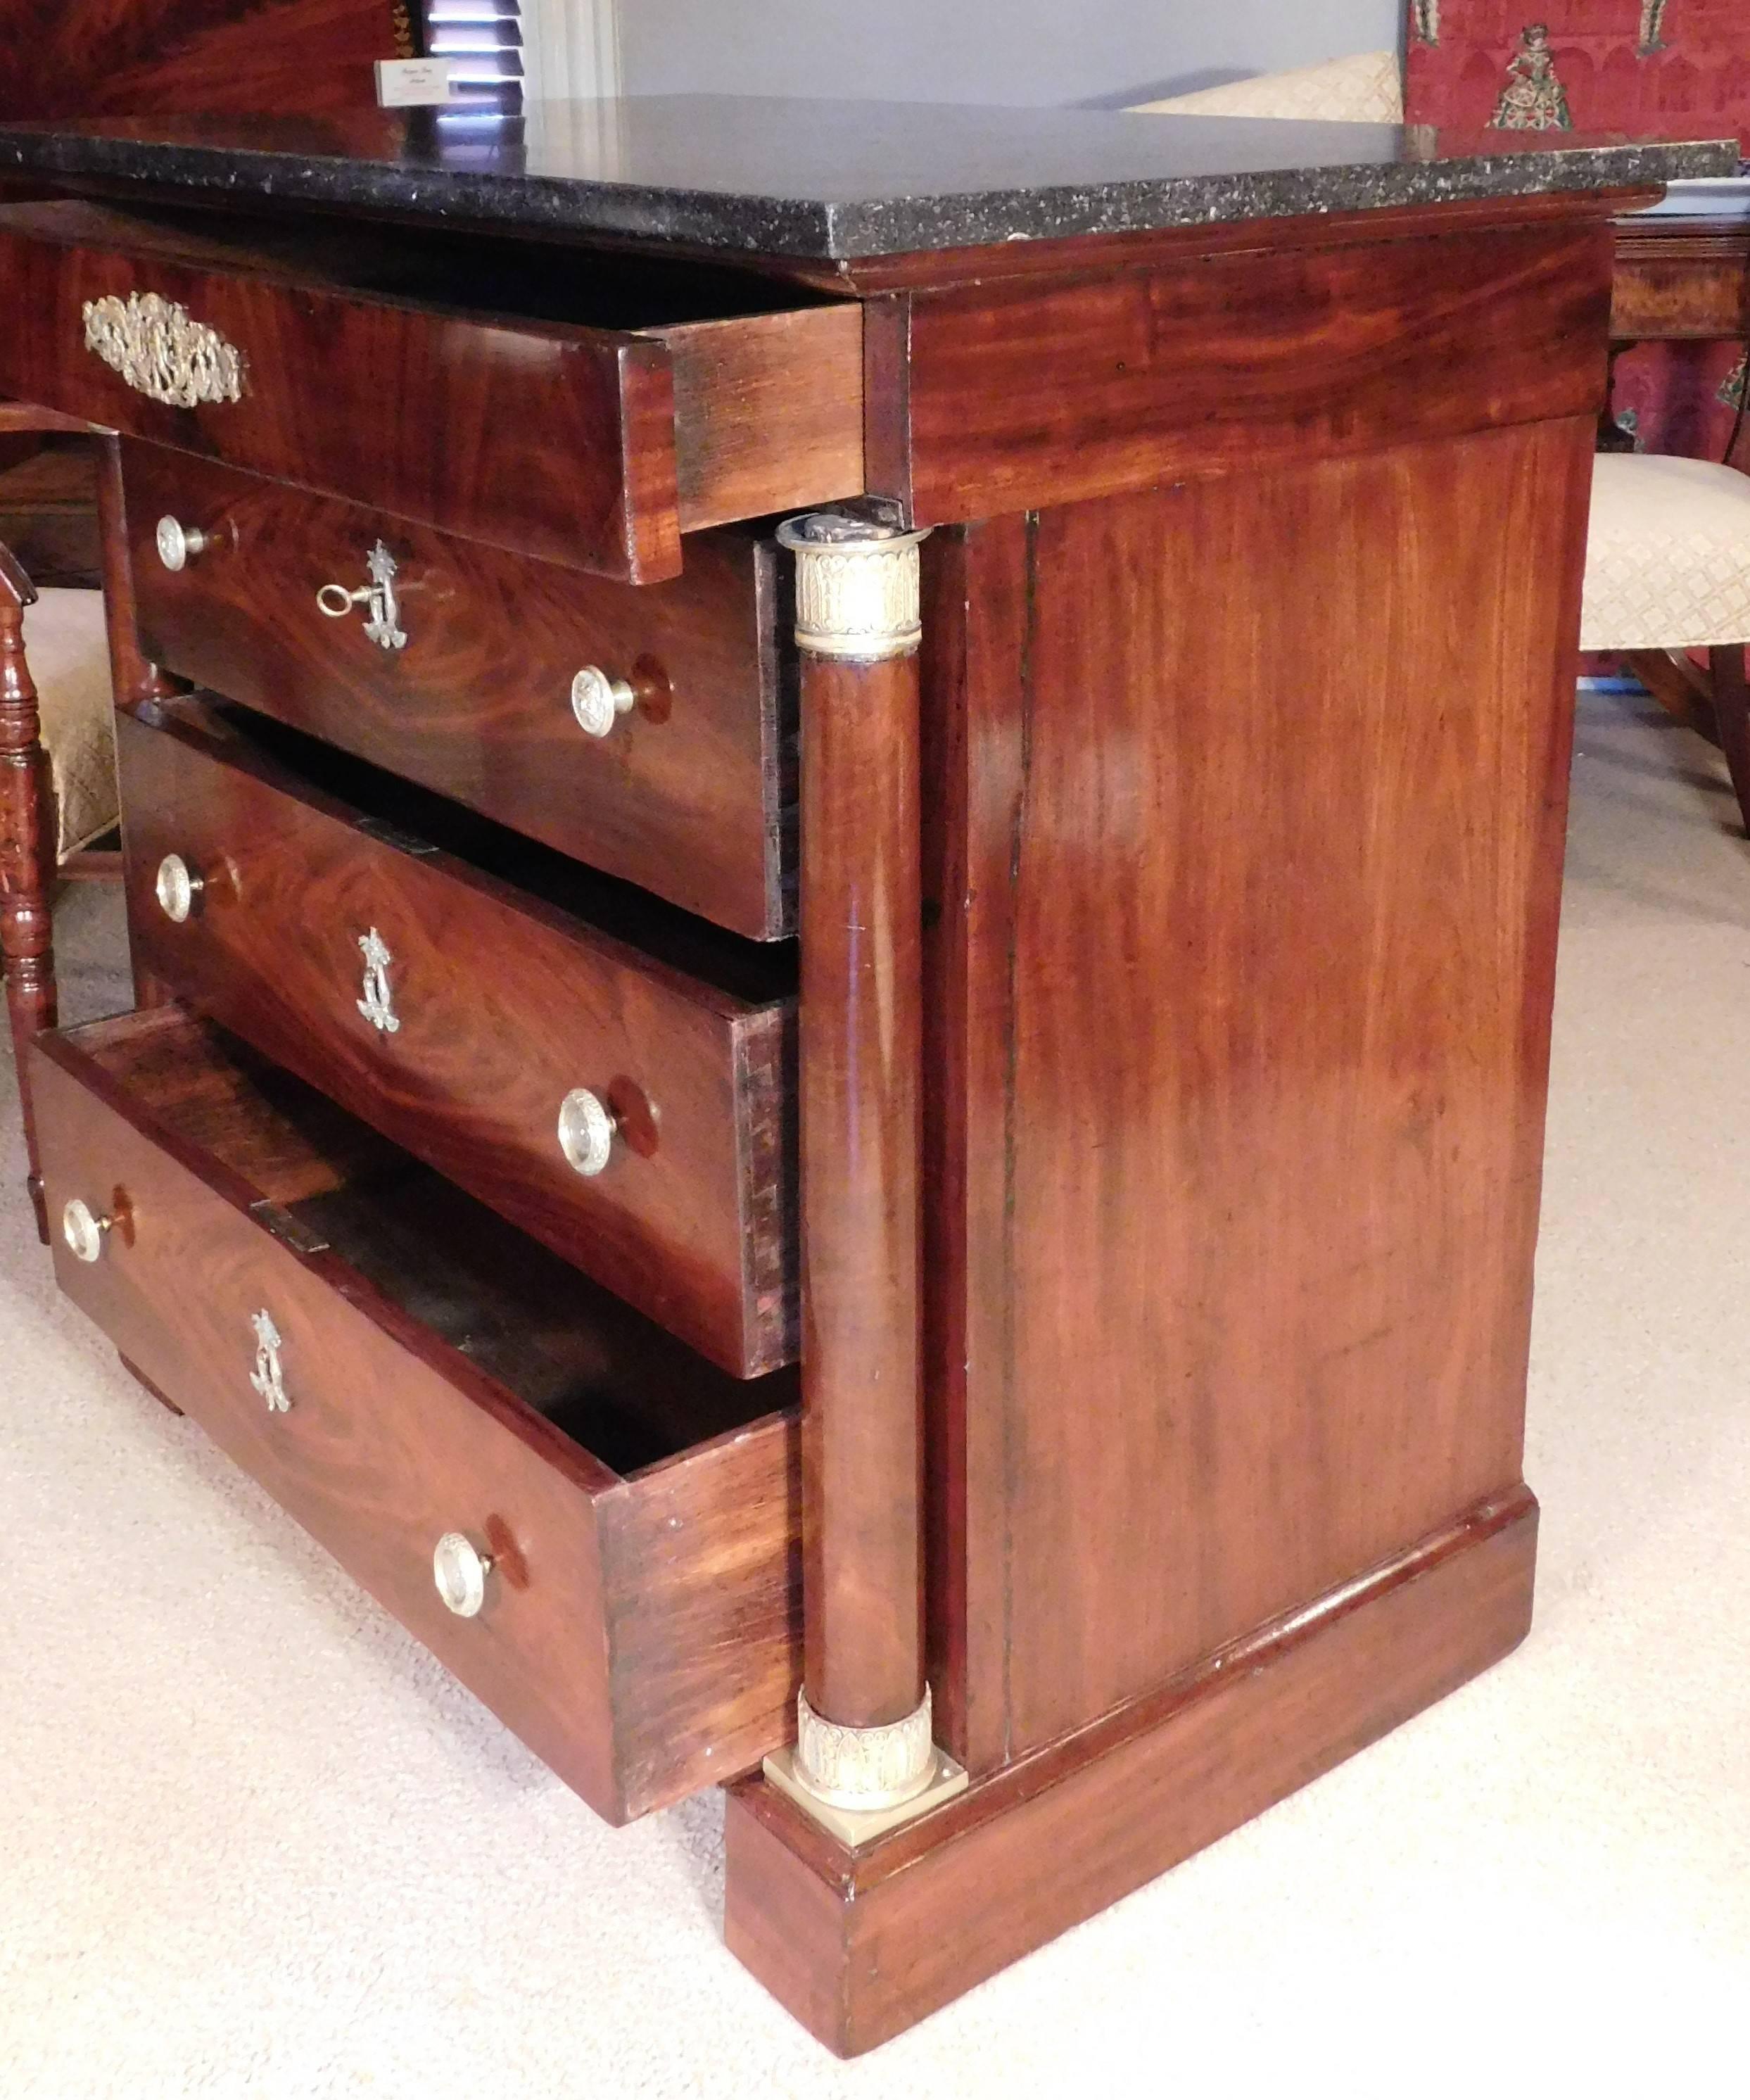 Mahogany and mahogany veneer with oak secondary wood. Finely cast bronze ormolu mounts and pulls. This chest has a narrow drawer over three large drawers. Stone top appears to be original with rear overhang.